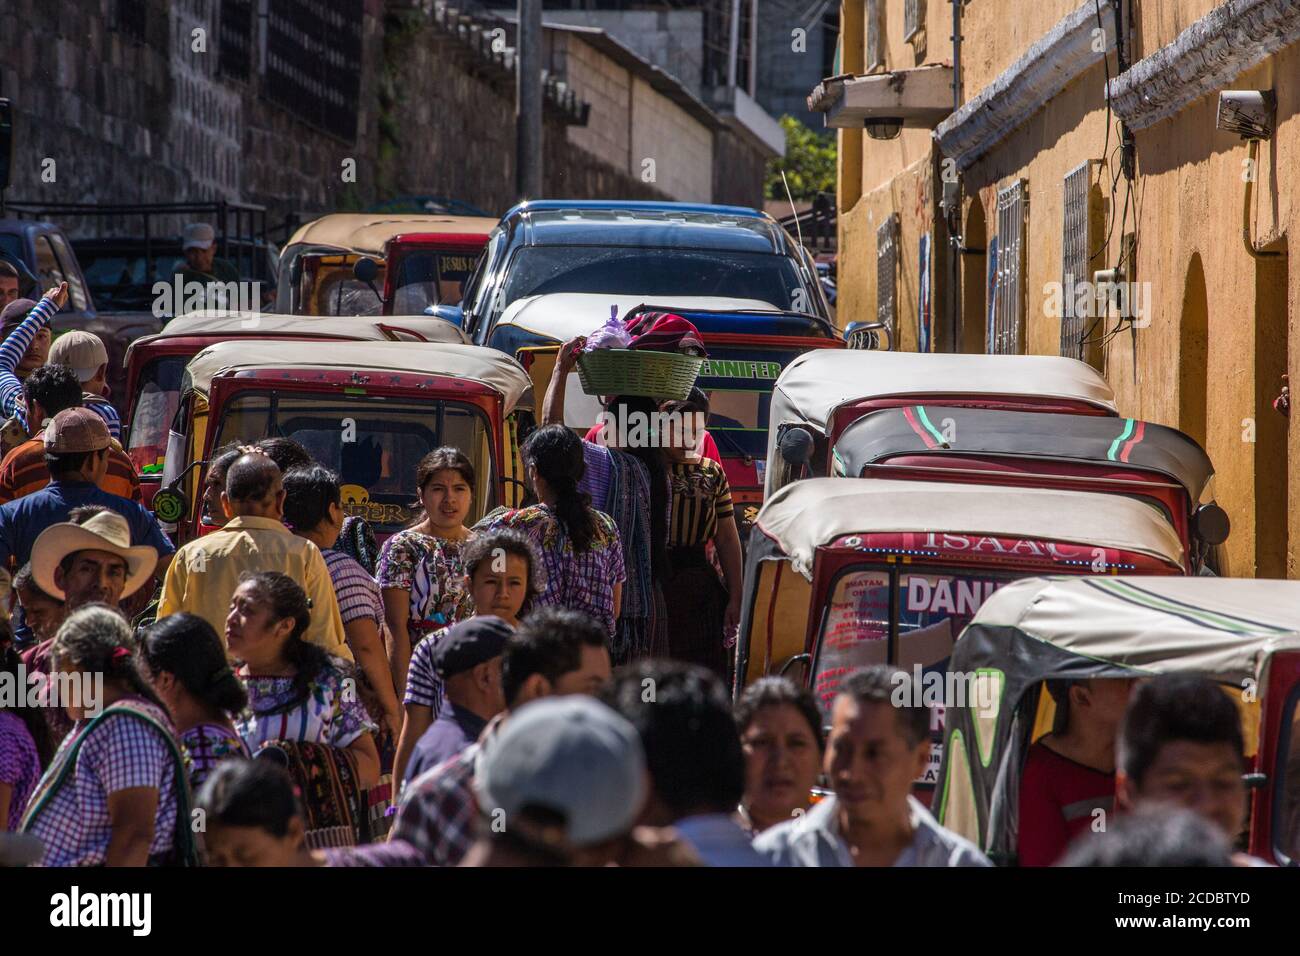 A street scene with heavy pedestrian and vehicular traffic by the weekly open market in Santiago Atitlan, Guatemala. Stock Photo